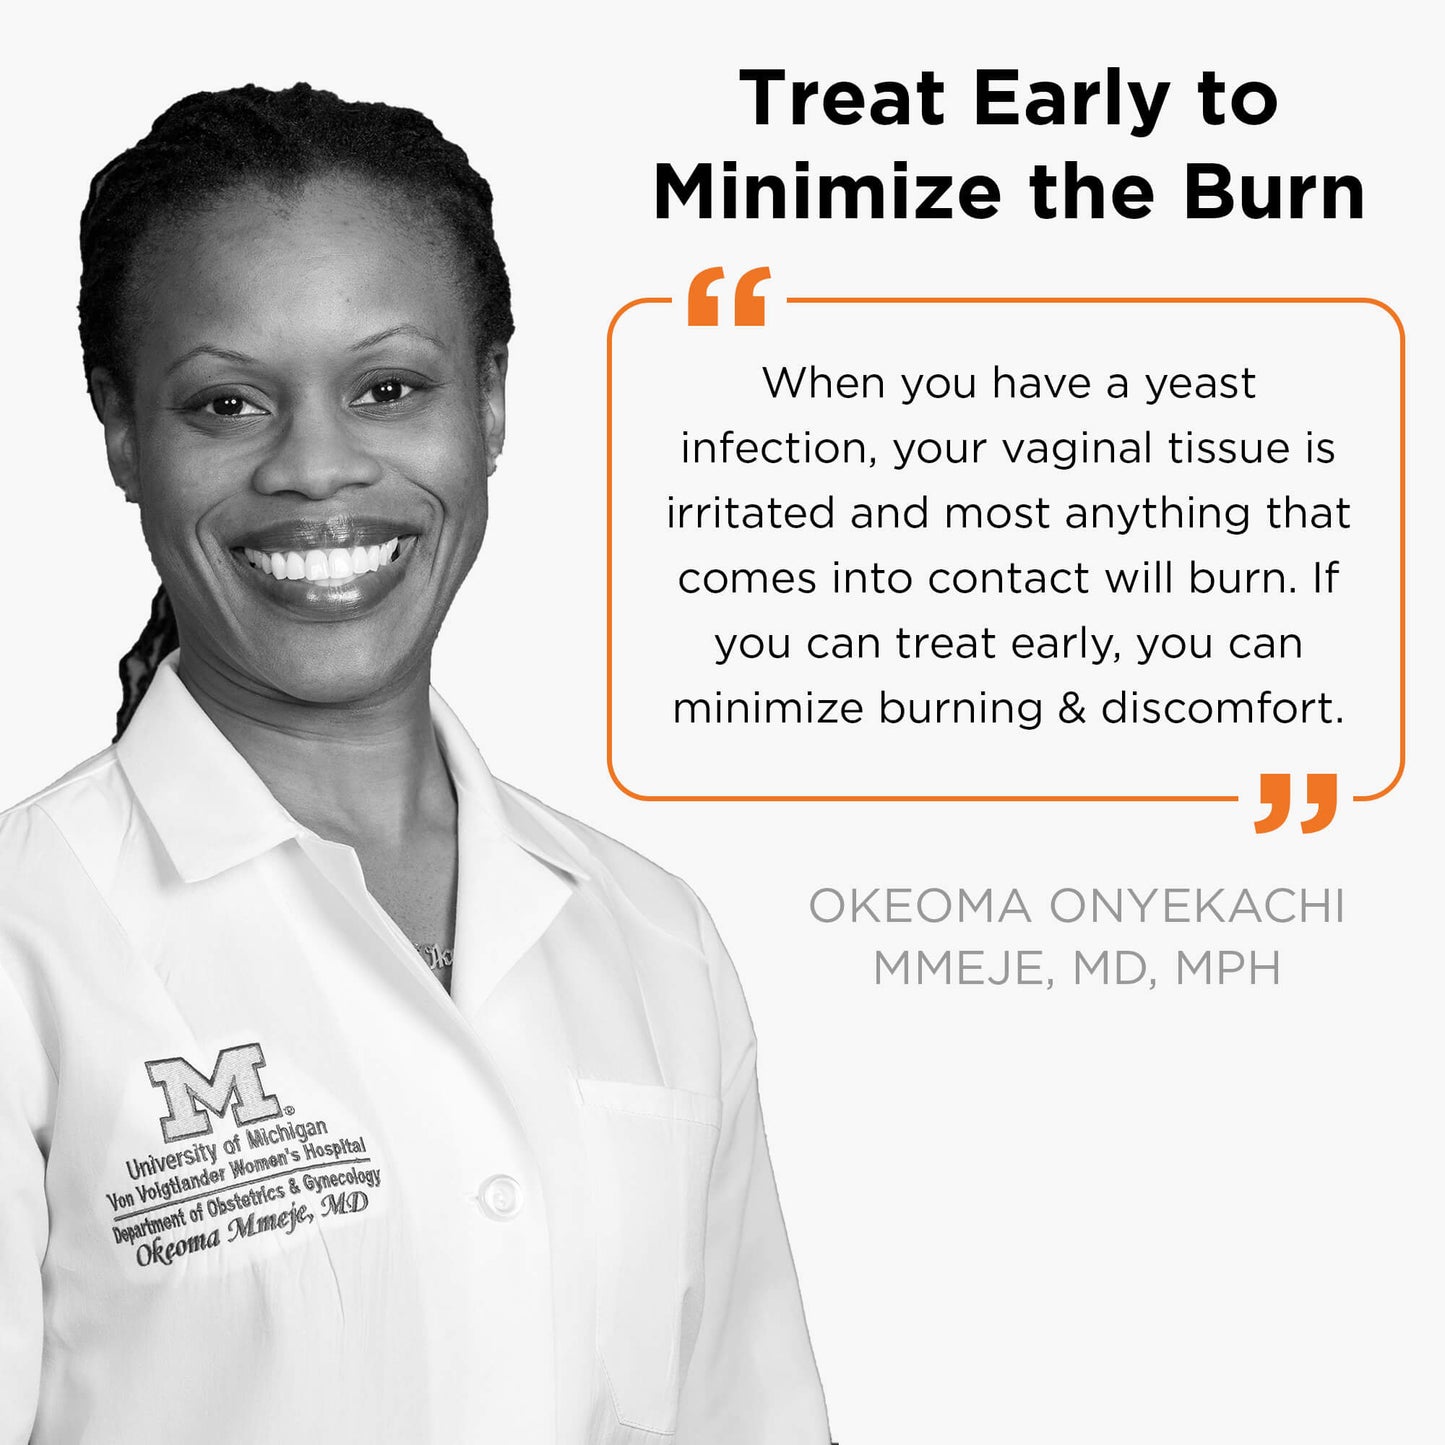 "When you have a yeast infection, your vaginal tissue is irritated and most anything that comes into contact will burn. If you can treat early, you can minimize burning and discomfort." Okeoma Onyekachi, MD, MPH